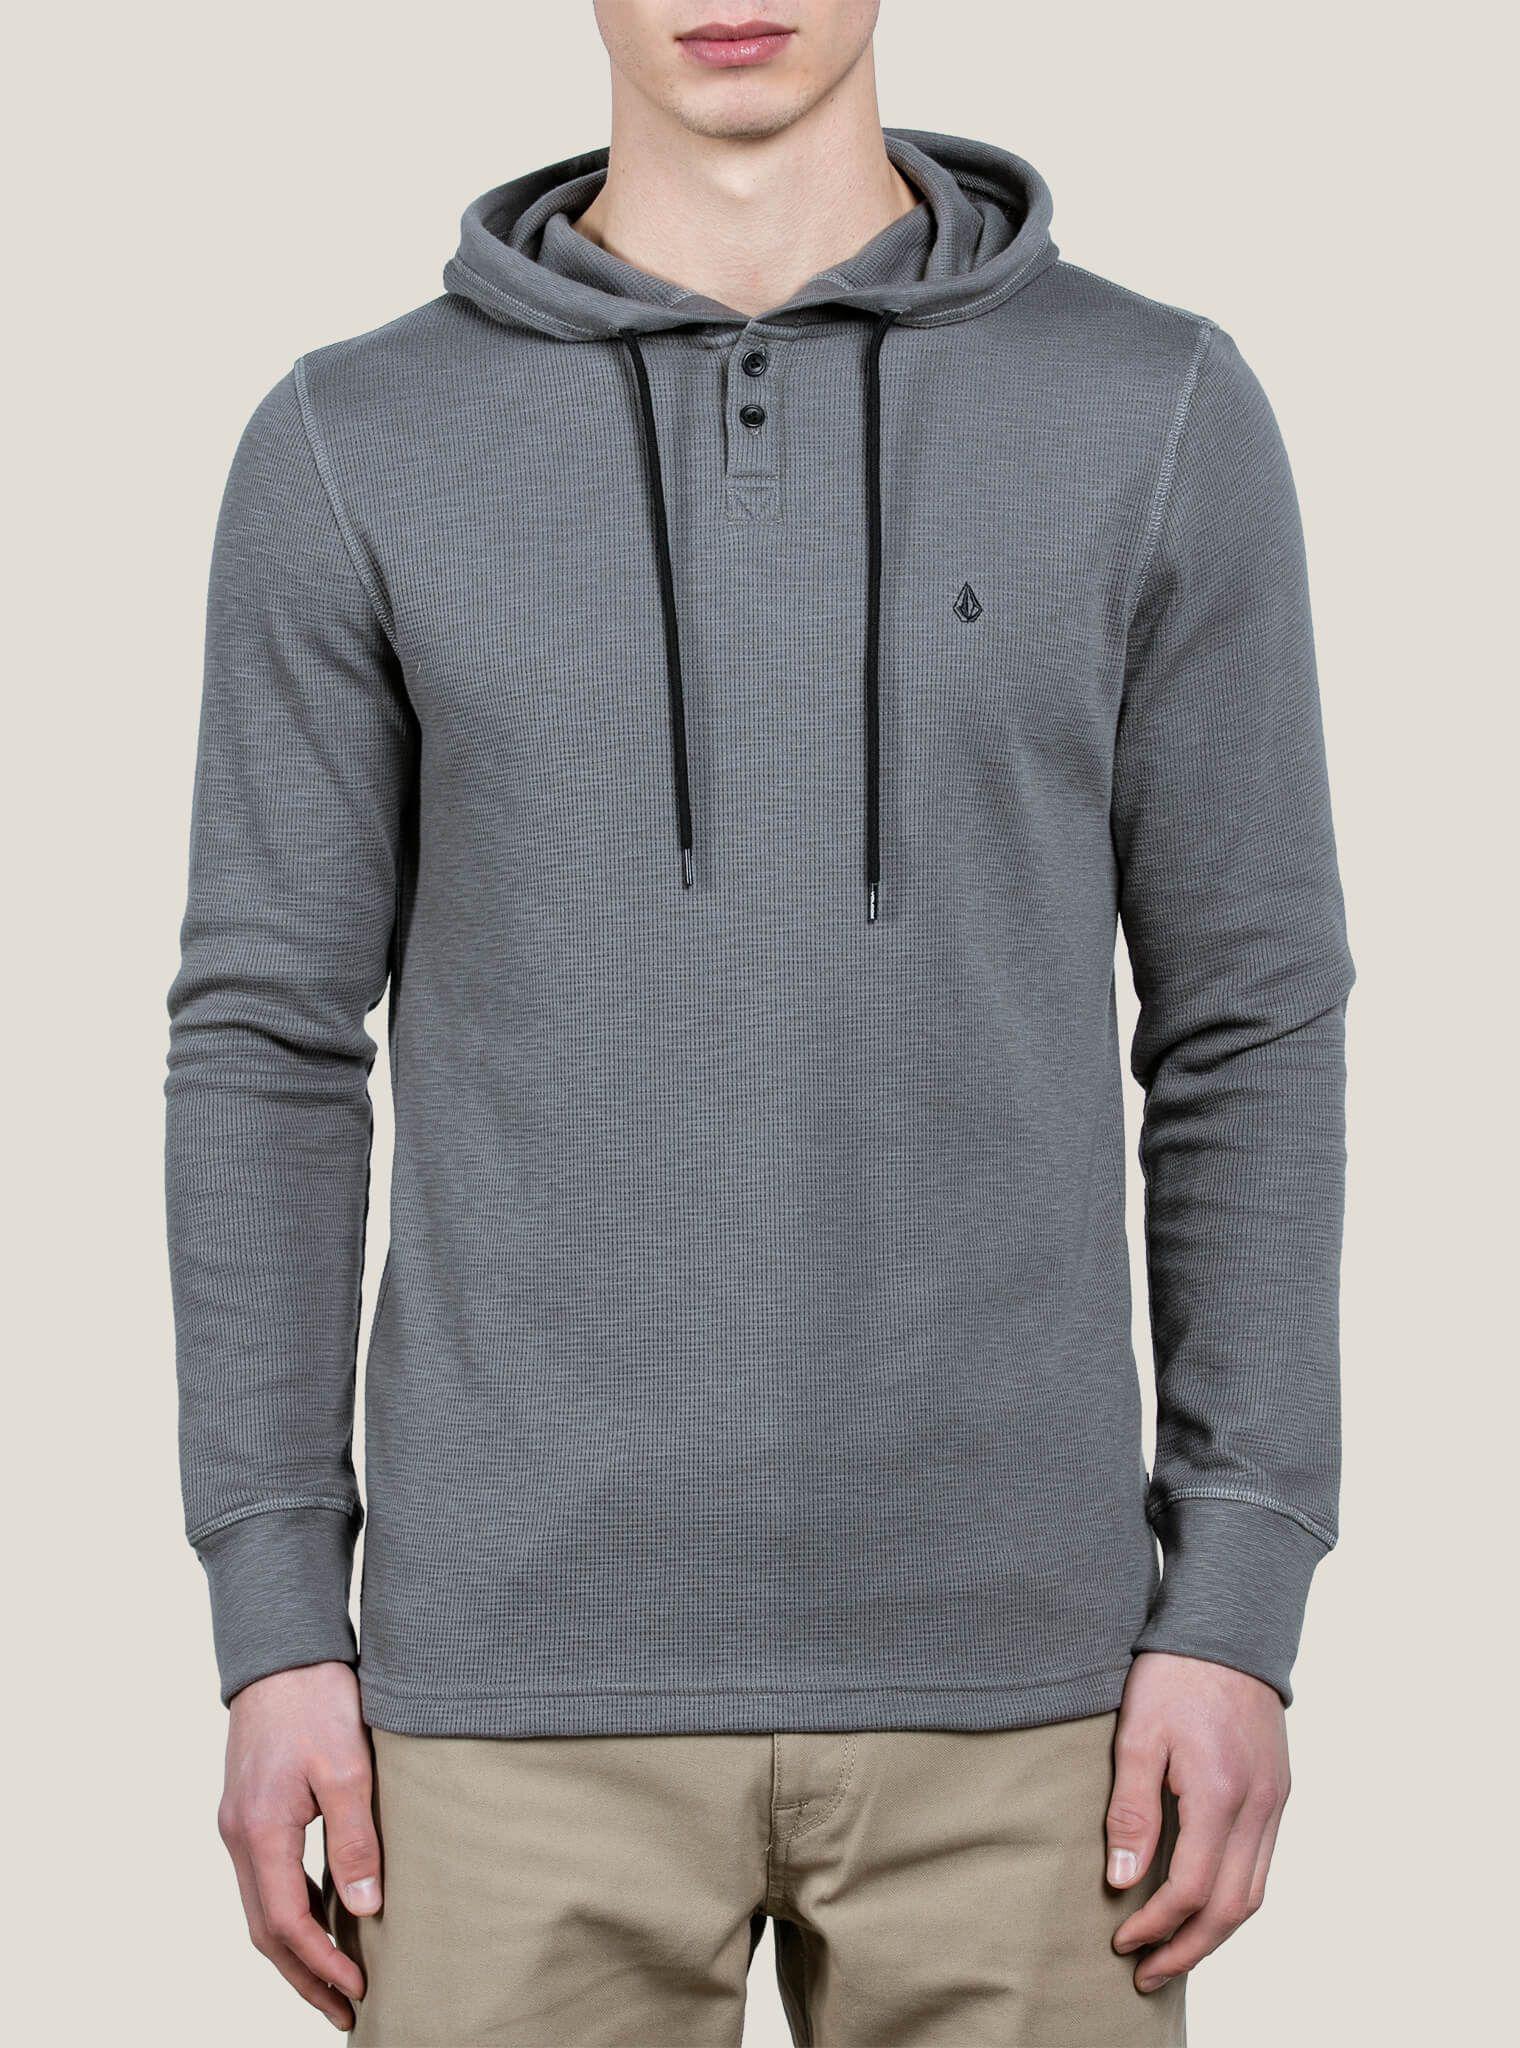 Volcom Cotton Murphy Thermal in Pewter (Gray) for Men - Lyst